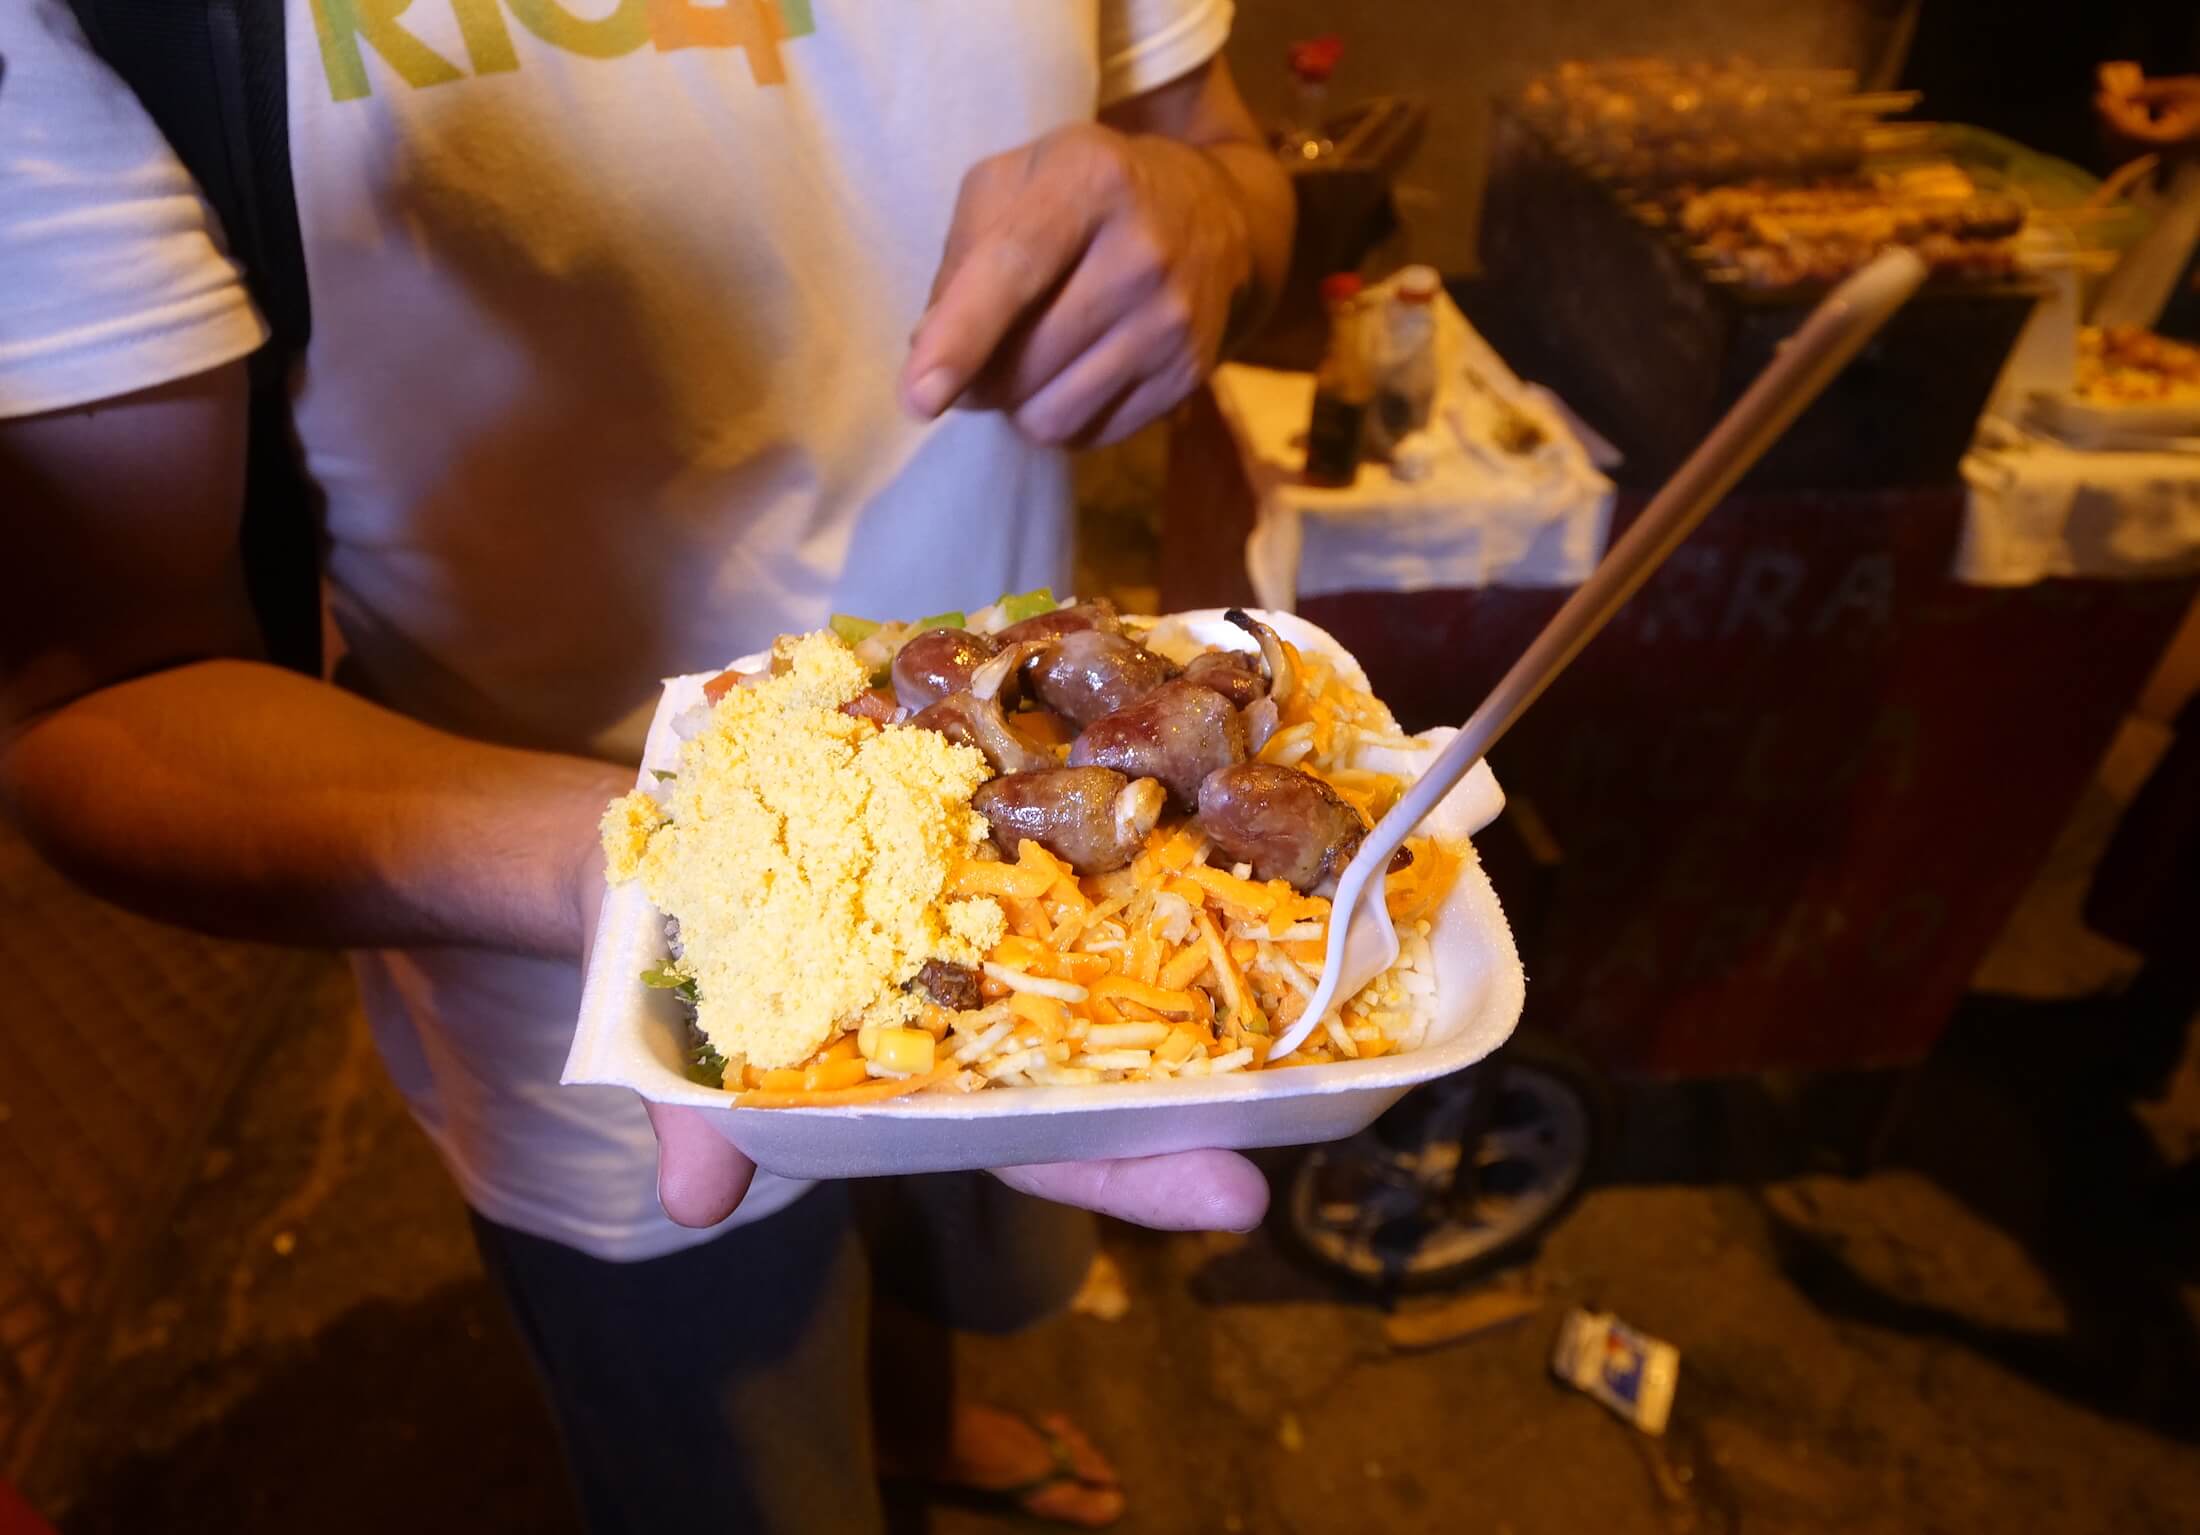 Amazing meals of meat on every street corner in Rio, but this one is worth the journey